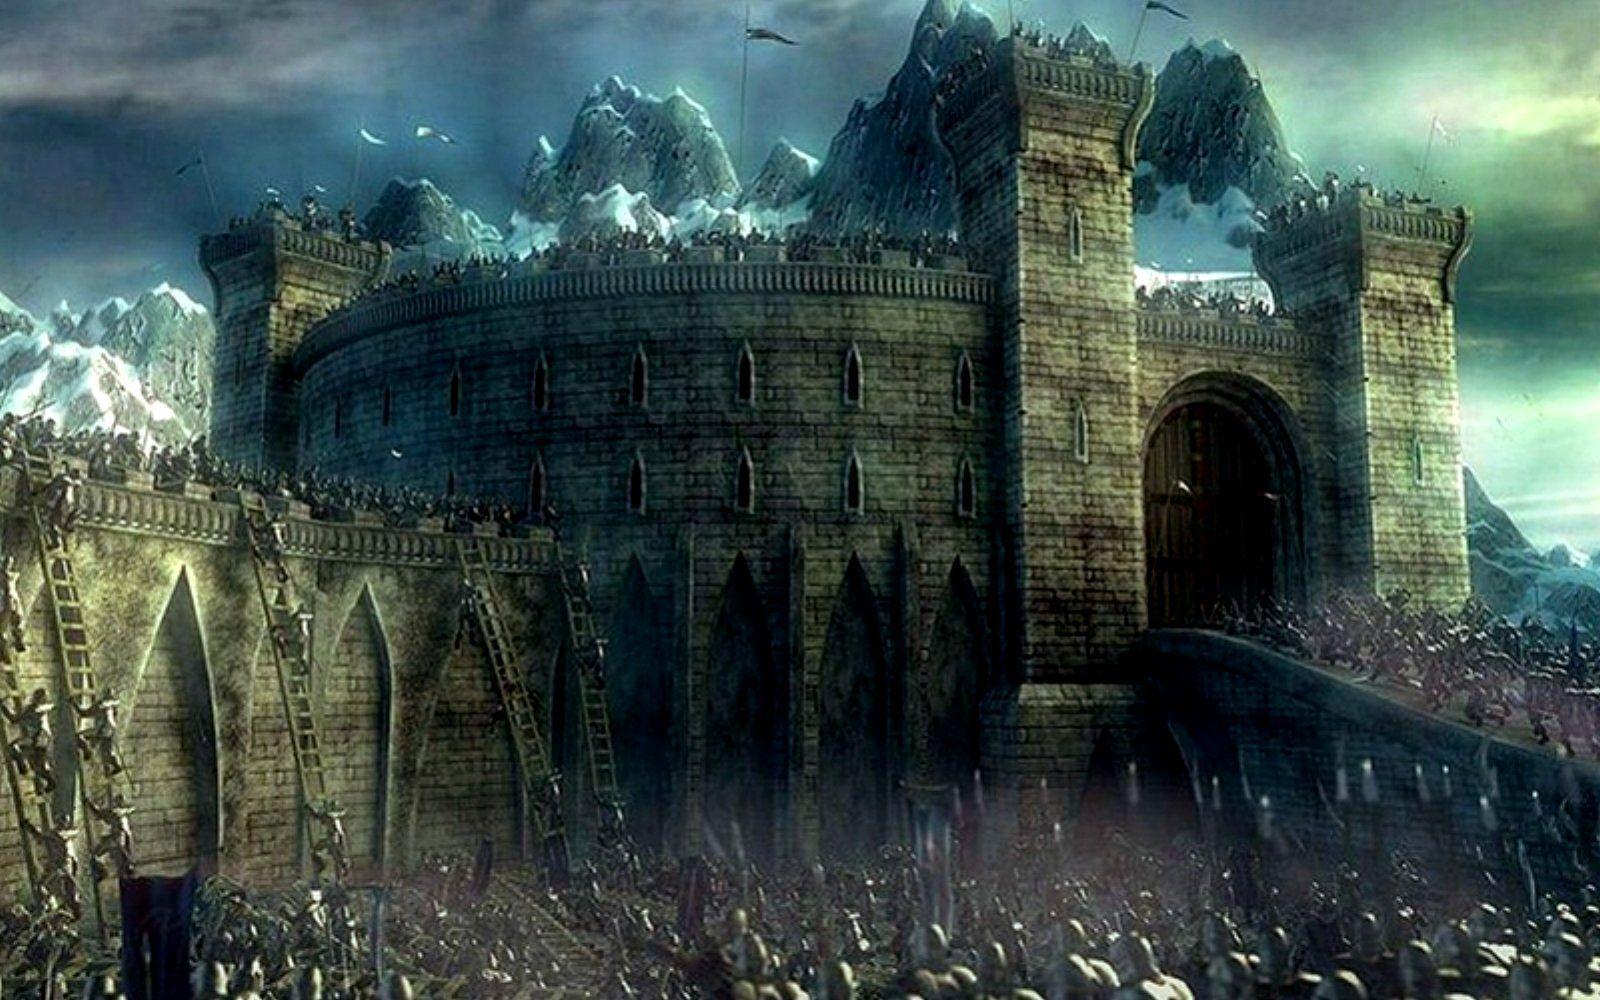 Cool Fantasy Castle Wallpaper. Photo Galleries and Wallpaper